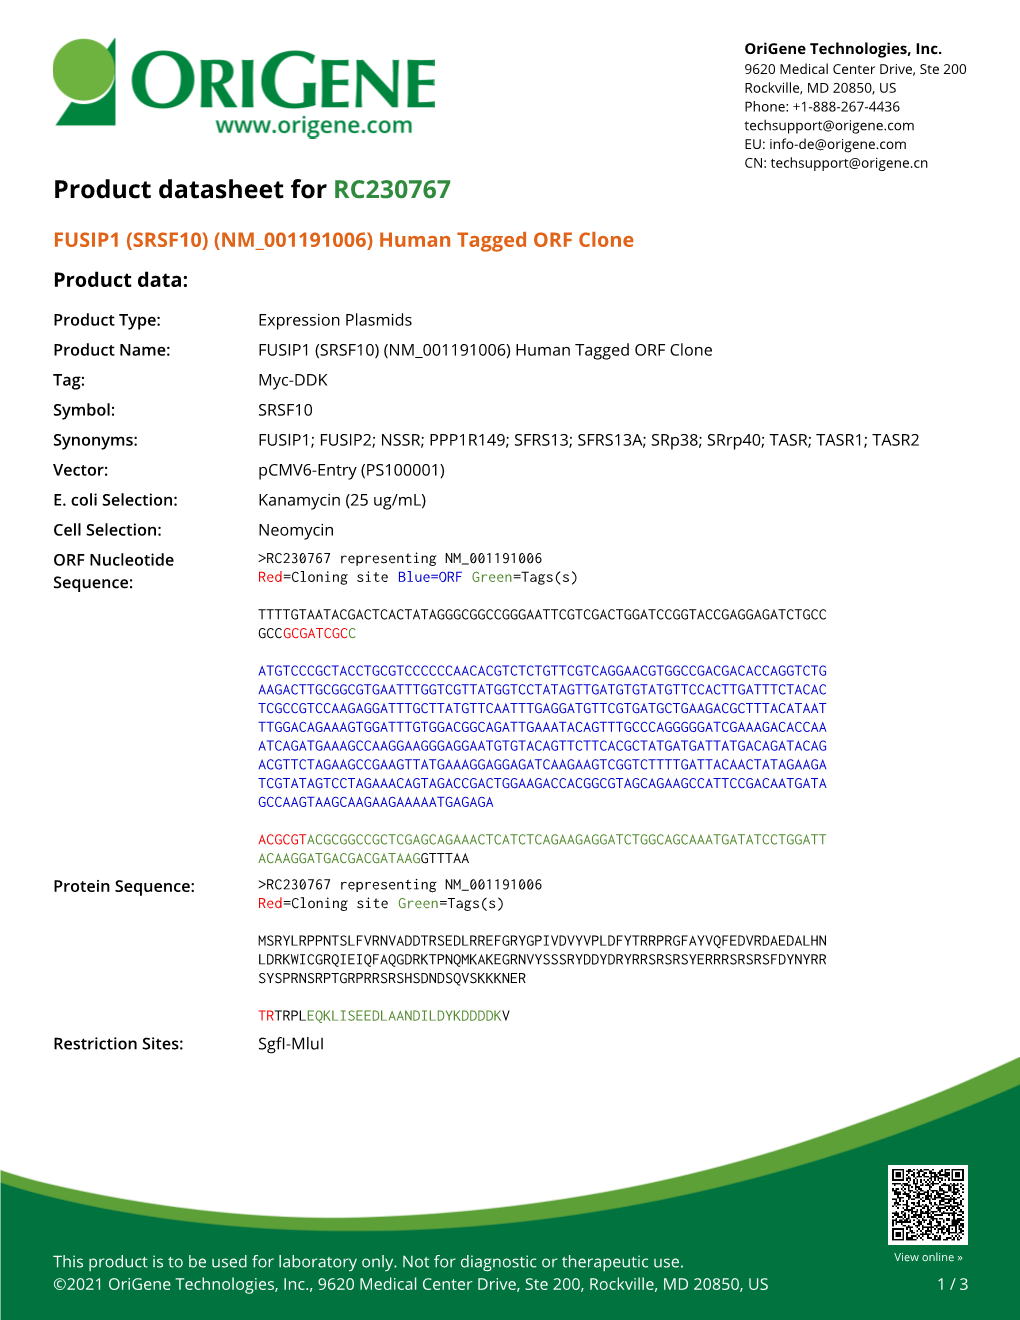 FUSIP1 (SRSF10) (NM 001191006) Human Tagged ORF Clone Product Data